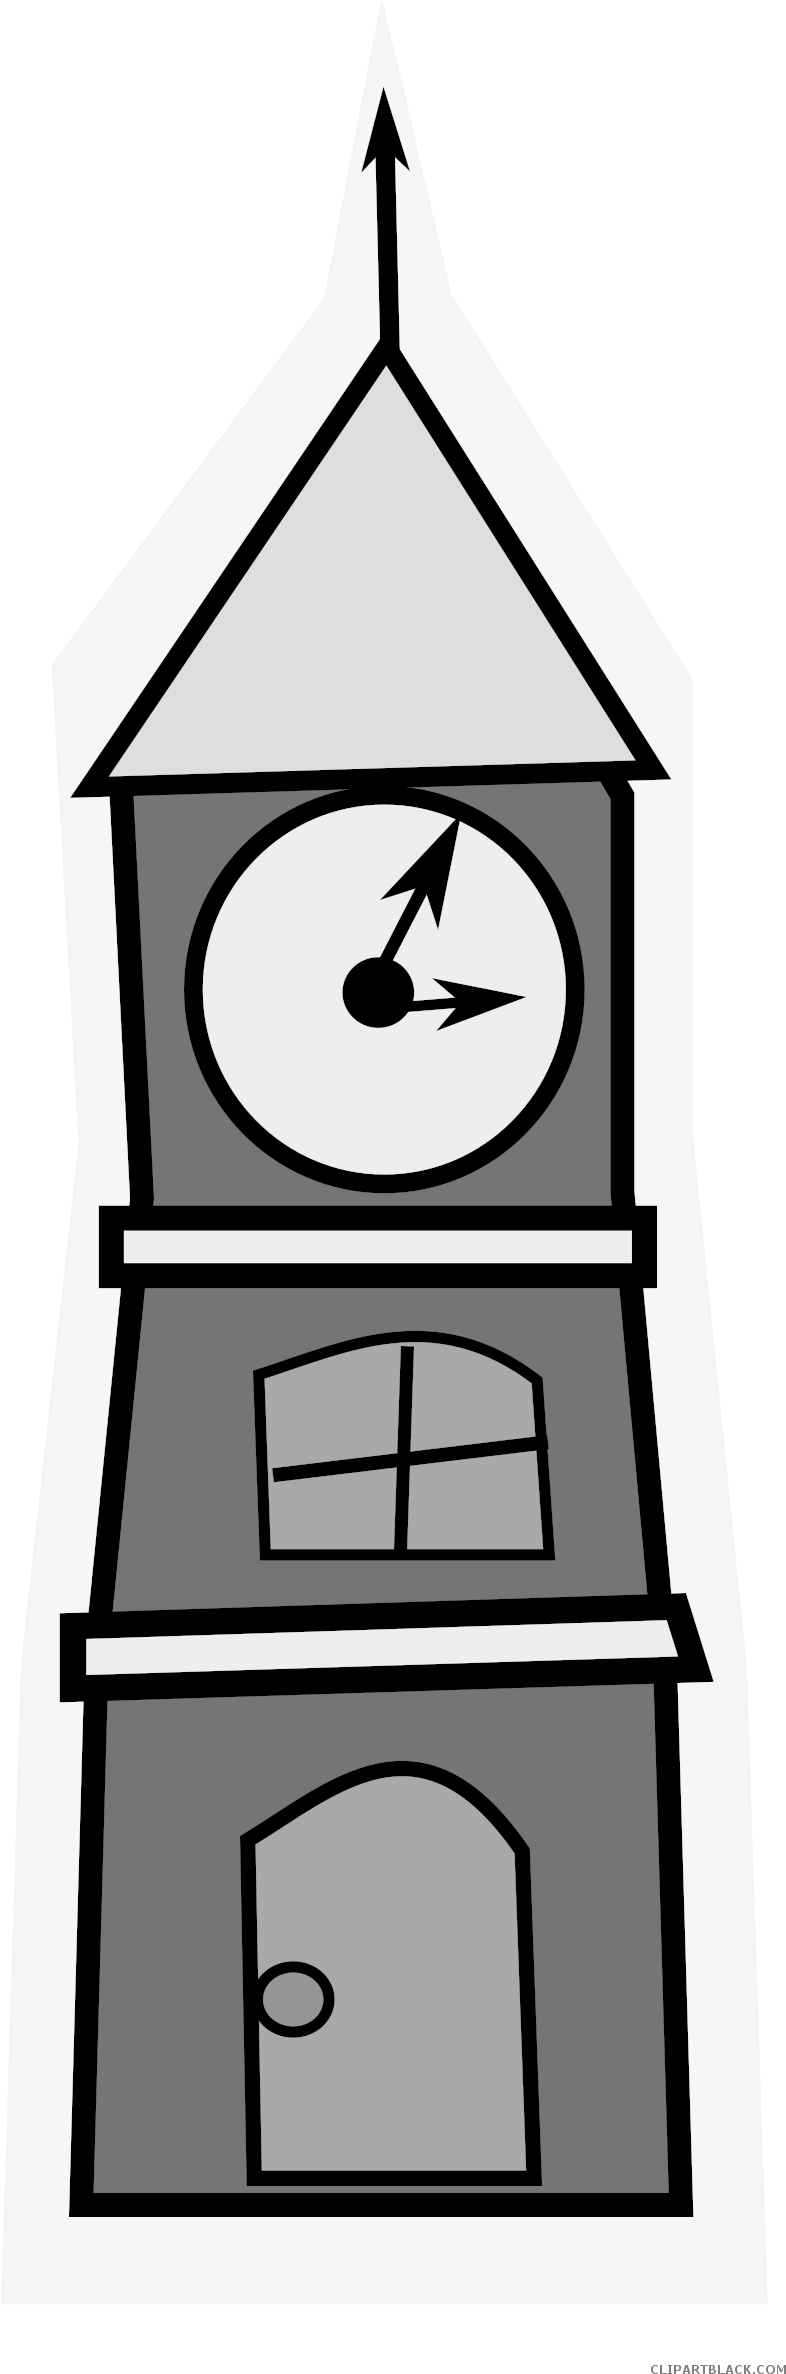 Cartoon Clock Tower Graphic PNG